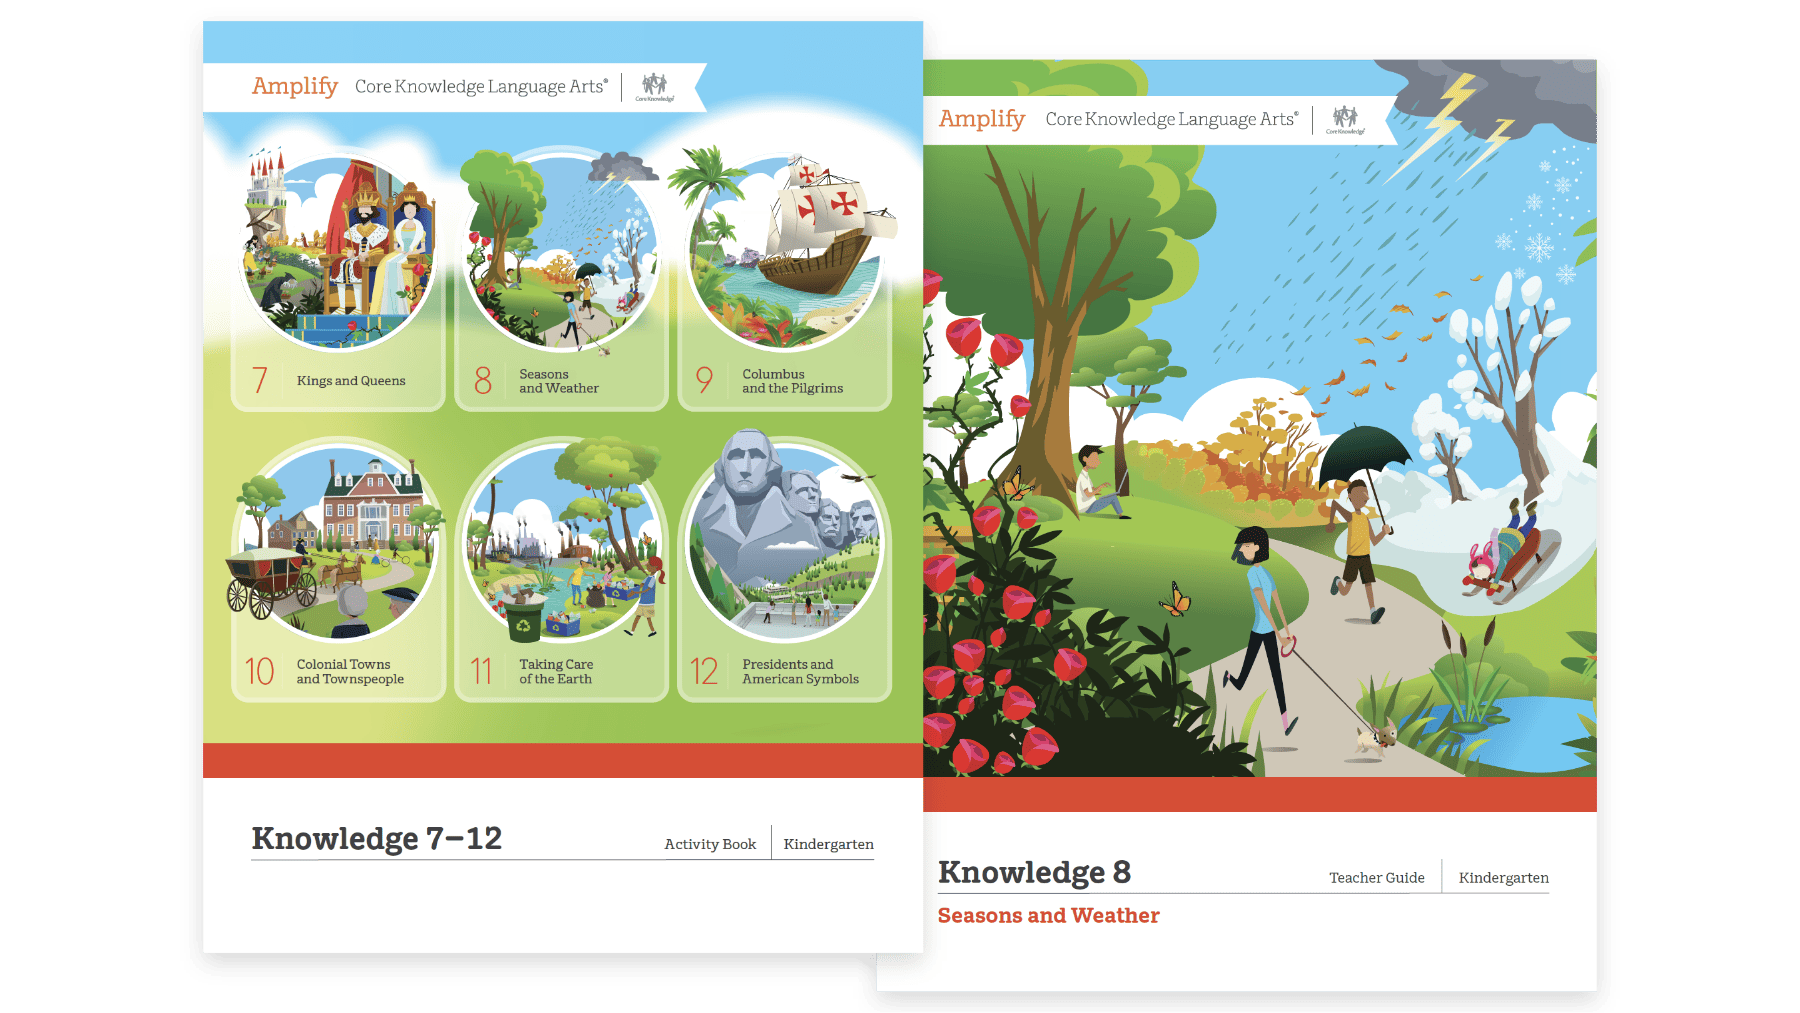 Educational posters illustrating Core Knowledge Language Arts concepts for kindergarten, featuring colorful illustrations of seasons, weather, and story elements across two pages.